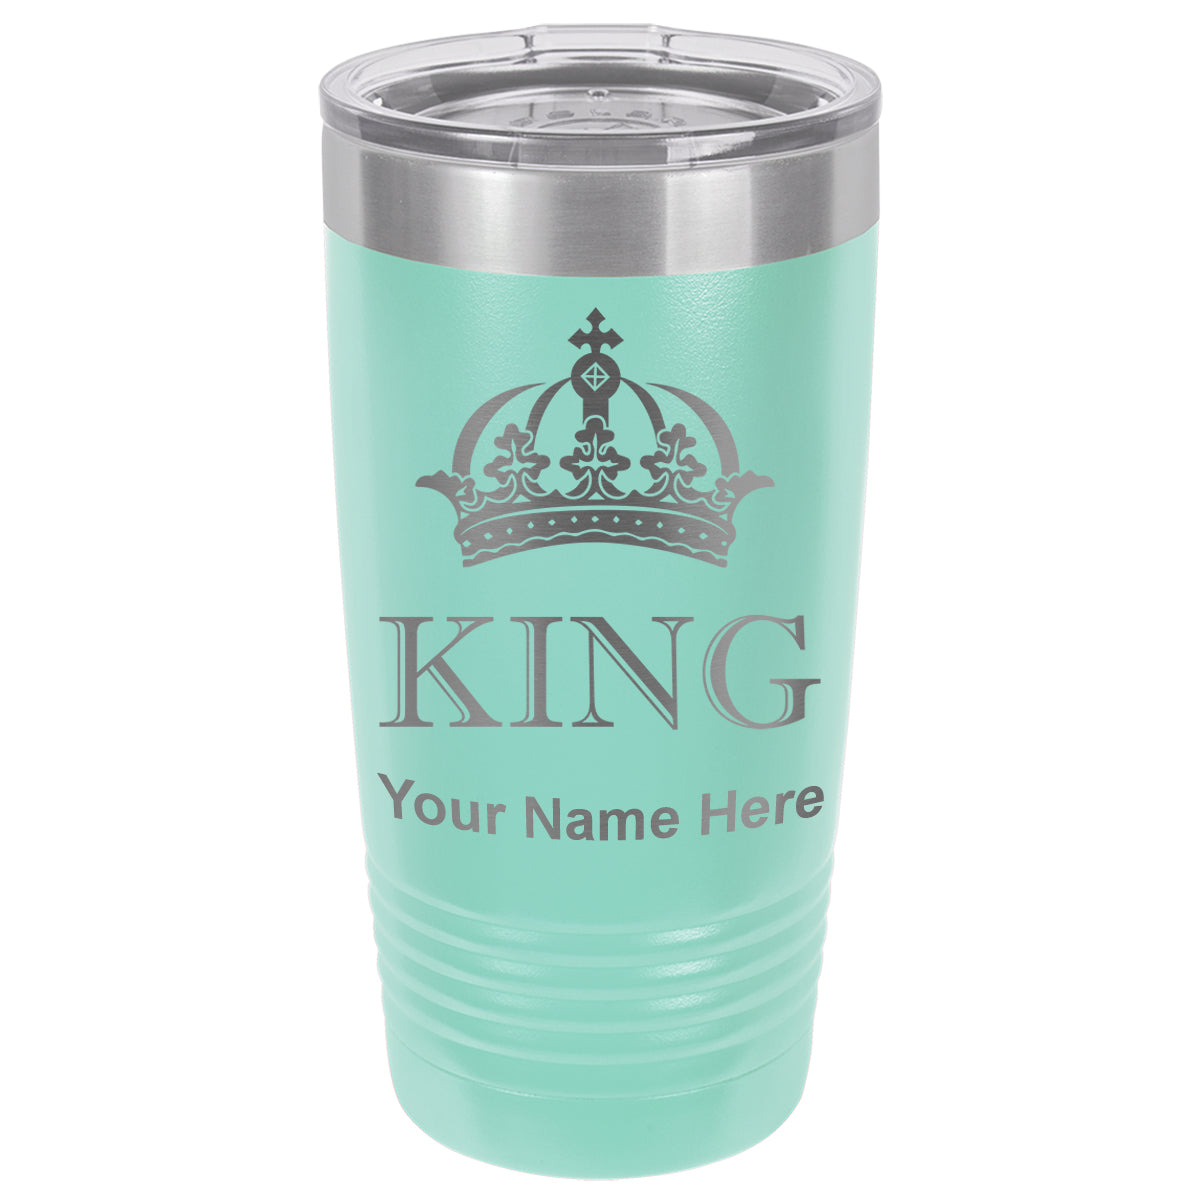 20oz Vacuum Insulated Tumbler Mug, King Crown, Personalized Engraving Included